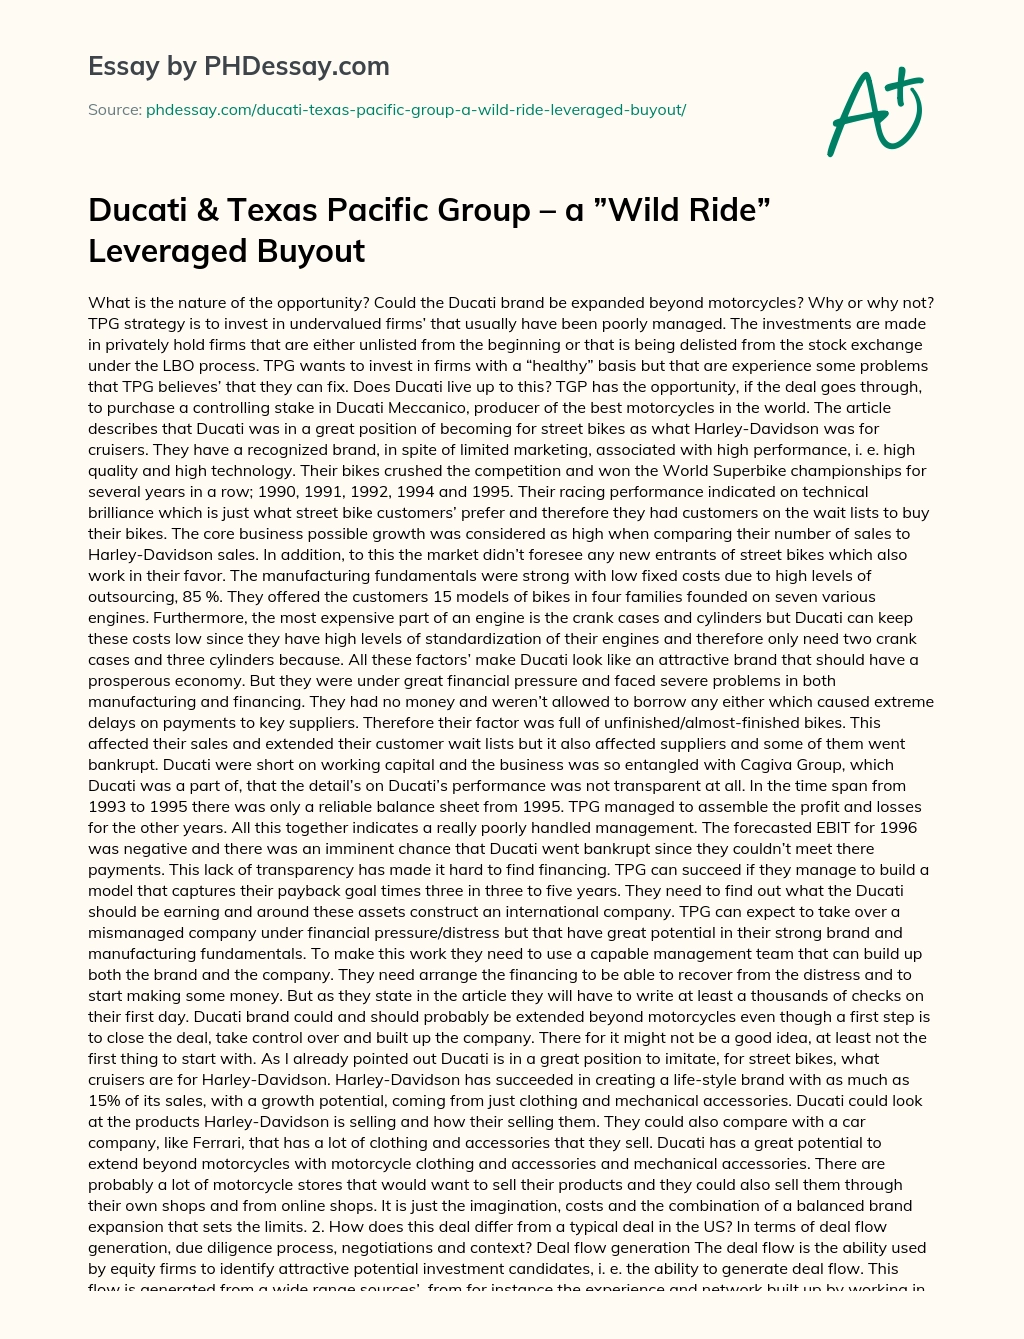 Ducati & Texas Pacific Group – a ”Wild Ride” Leveraged Buyout essay